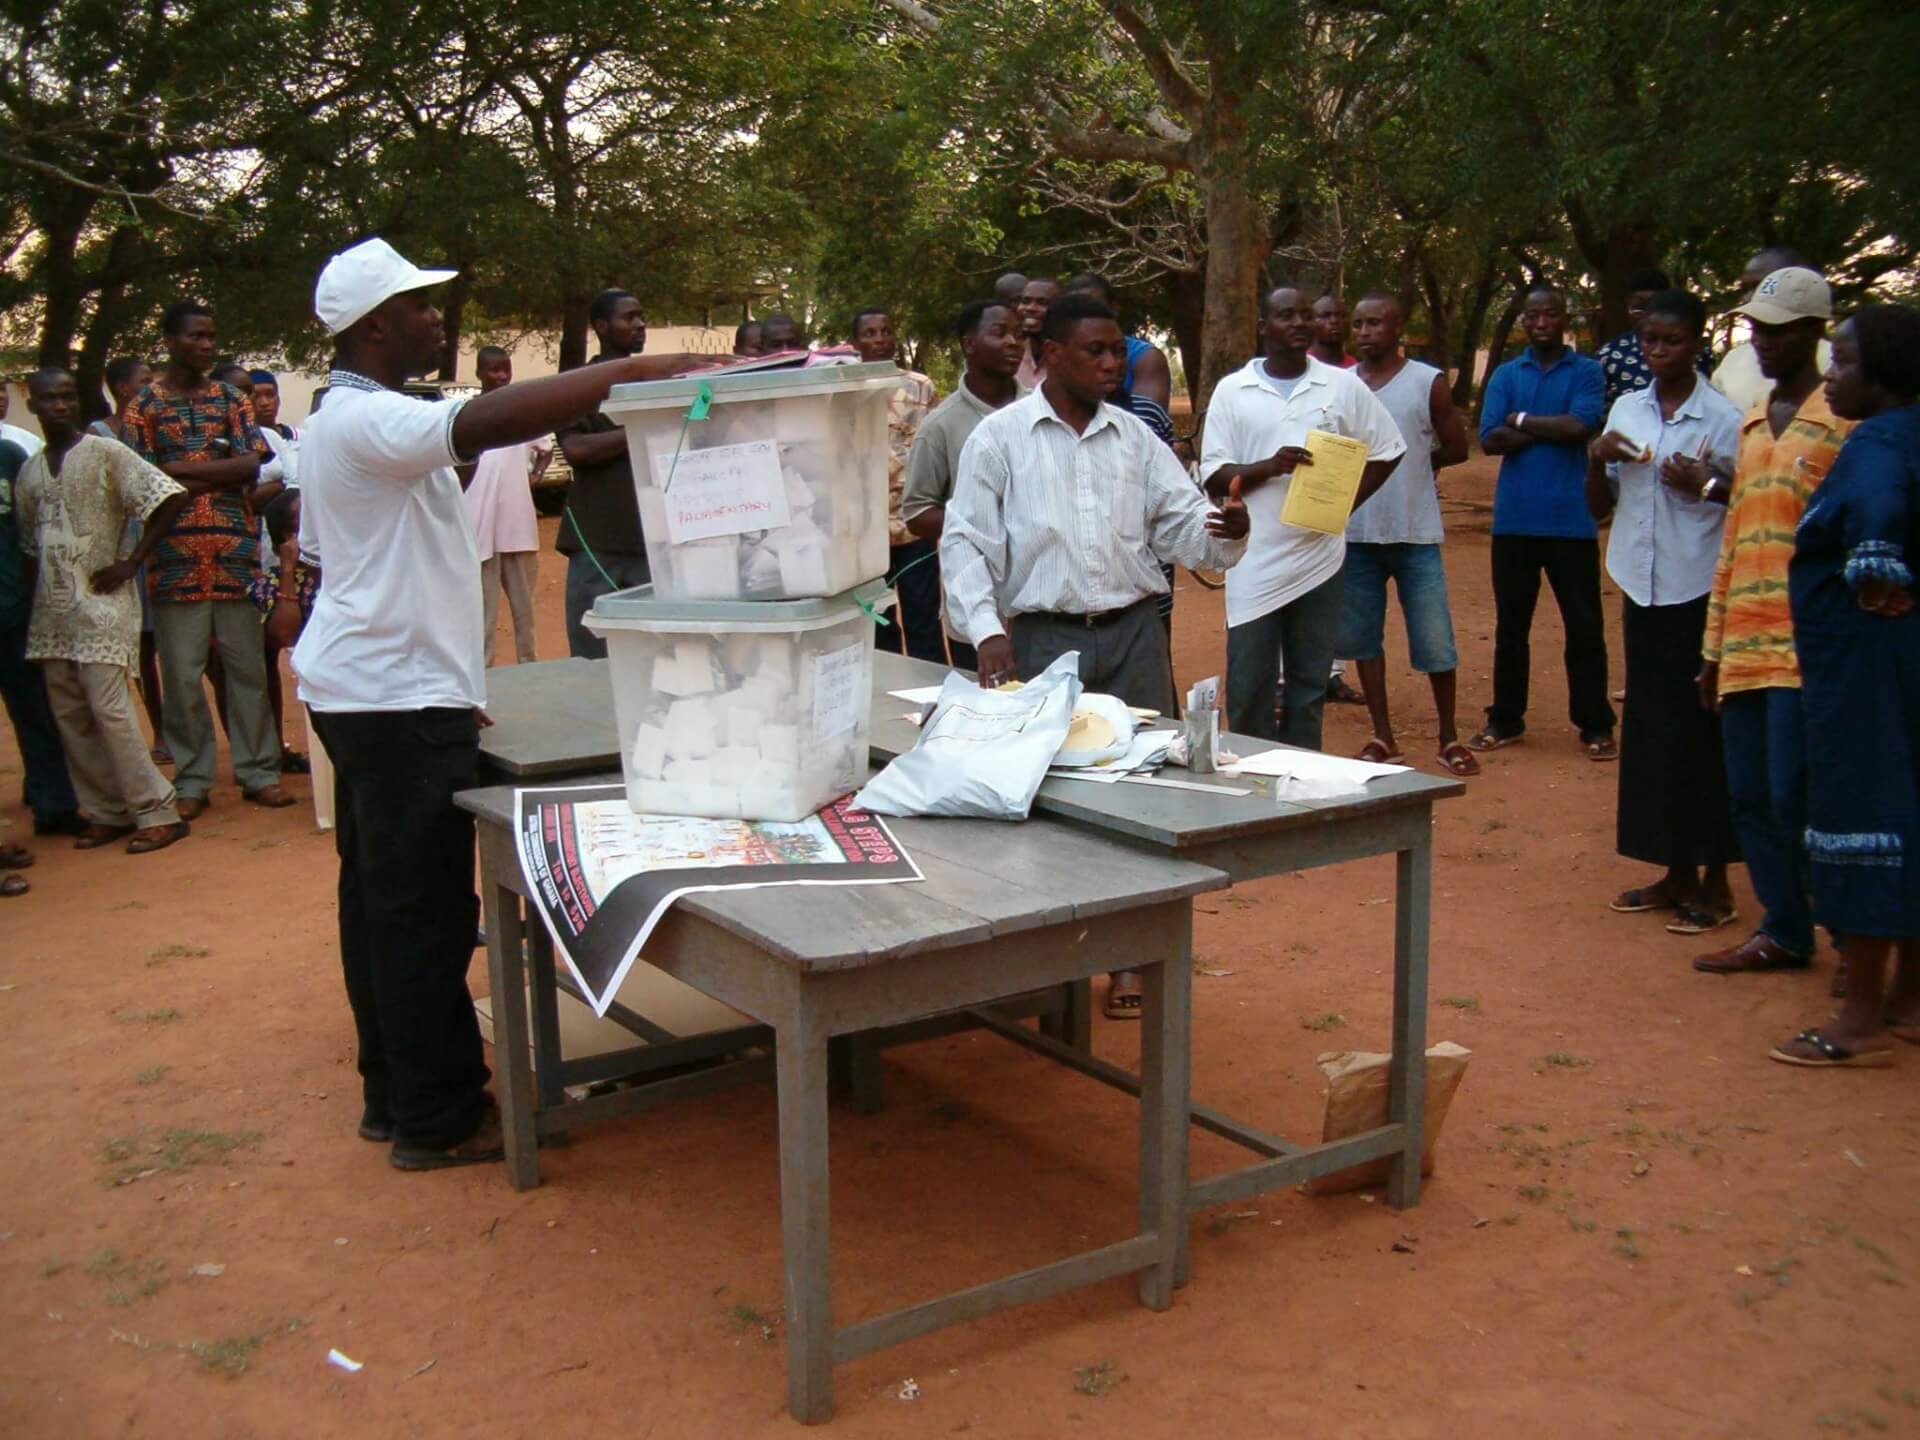 The Impact of the Coronavirus on Electoral Democracy in Africa